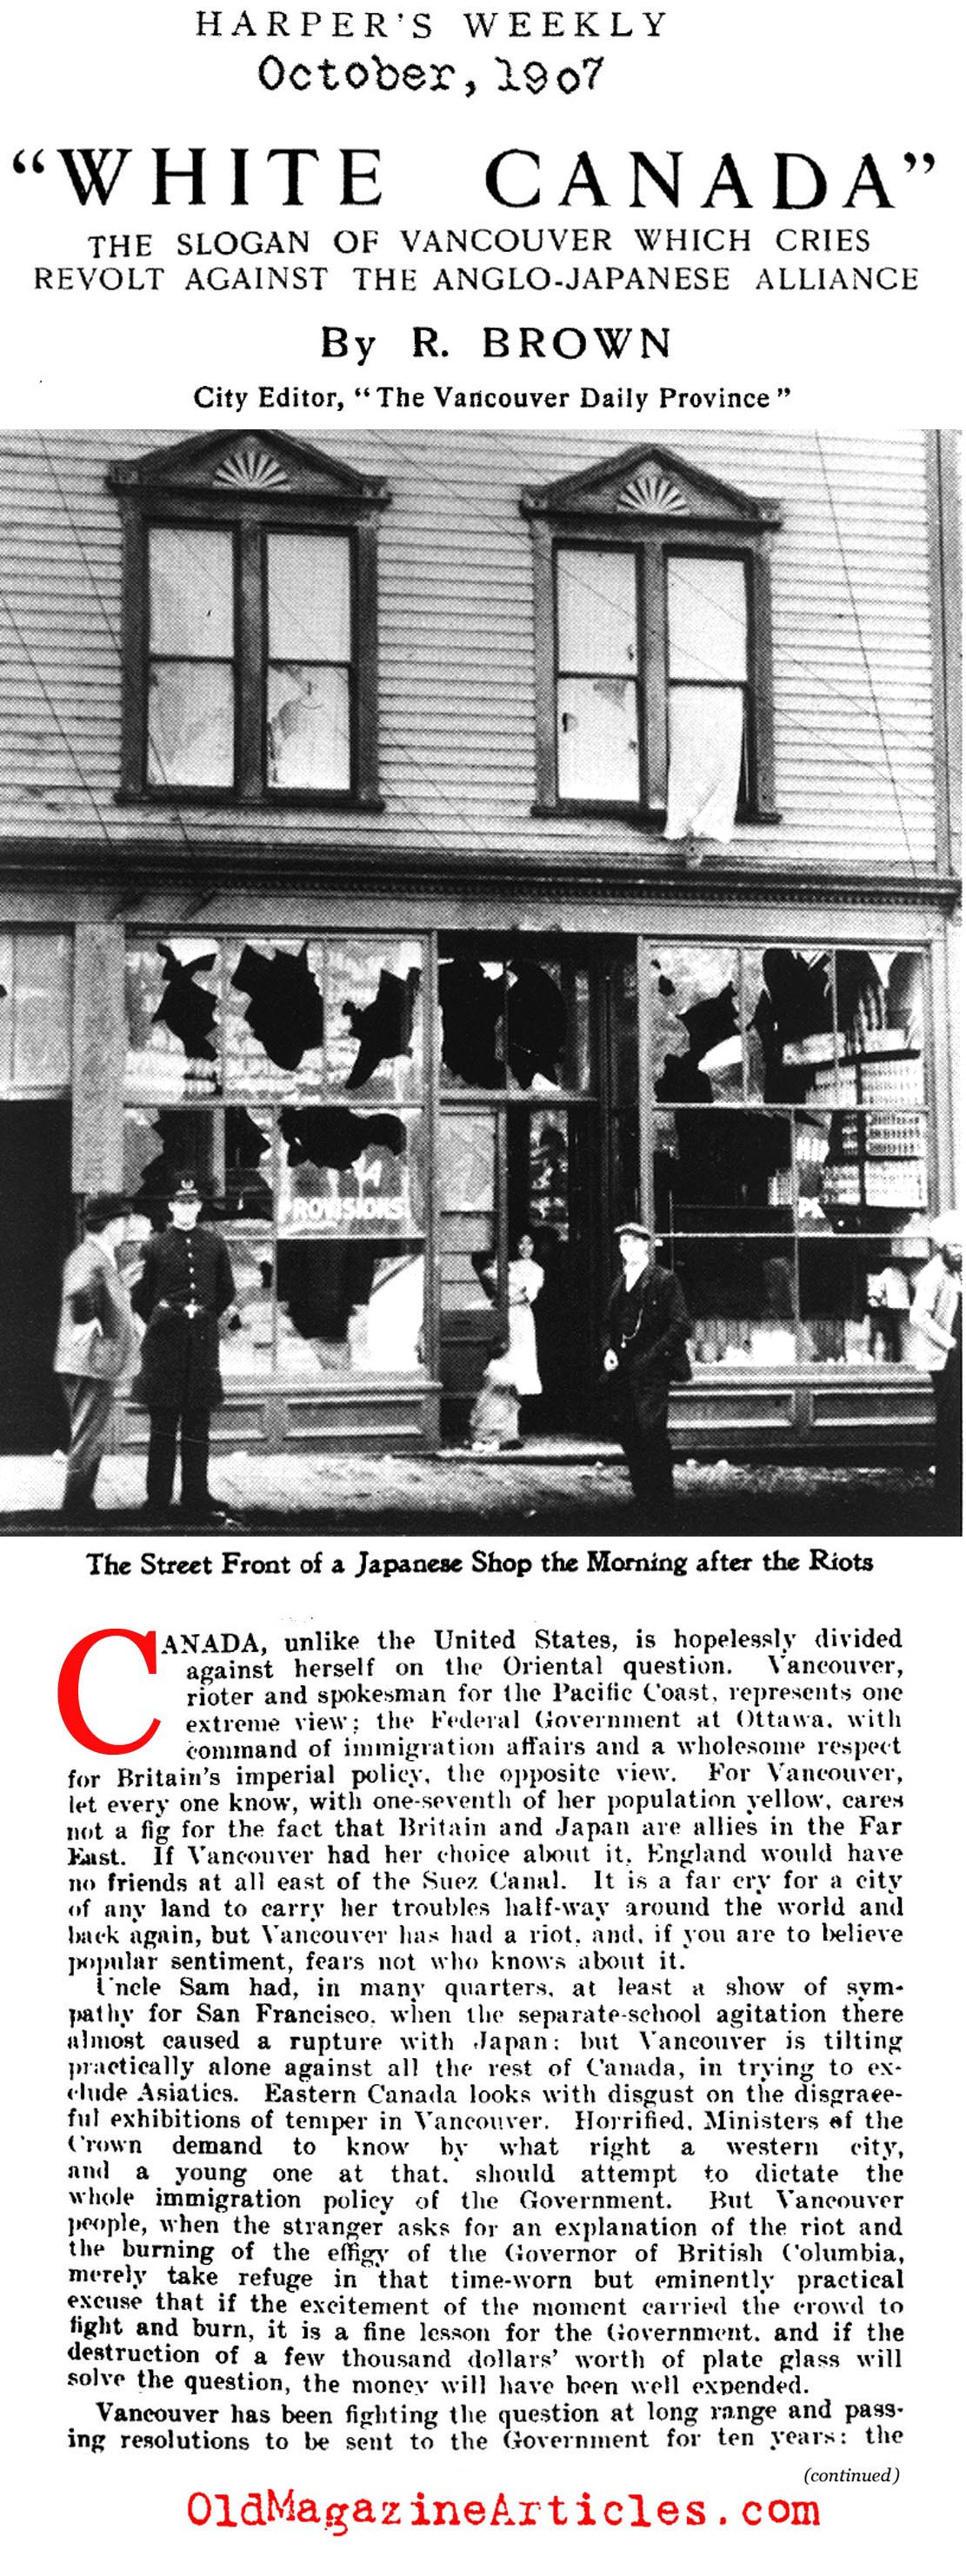 Race Riots in Vancouver   (Harper's Weekly, 1907)